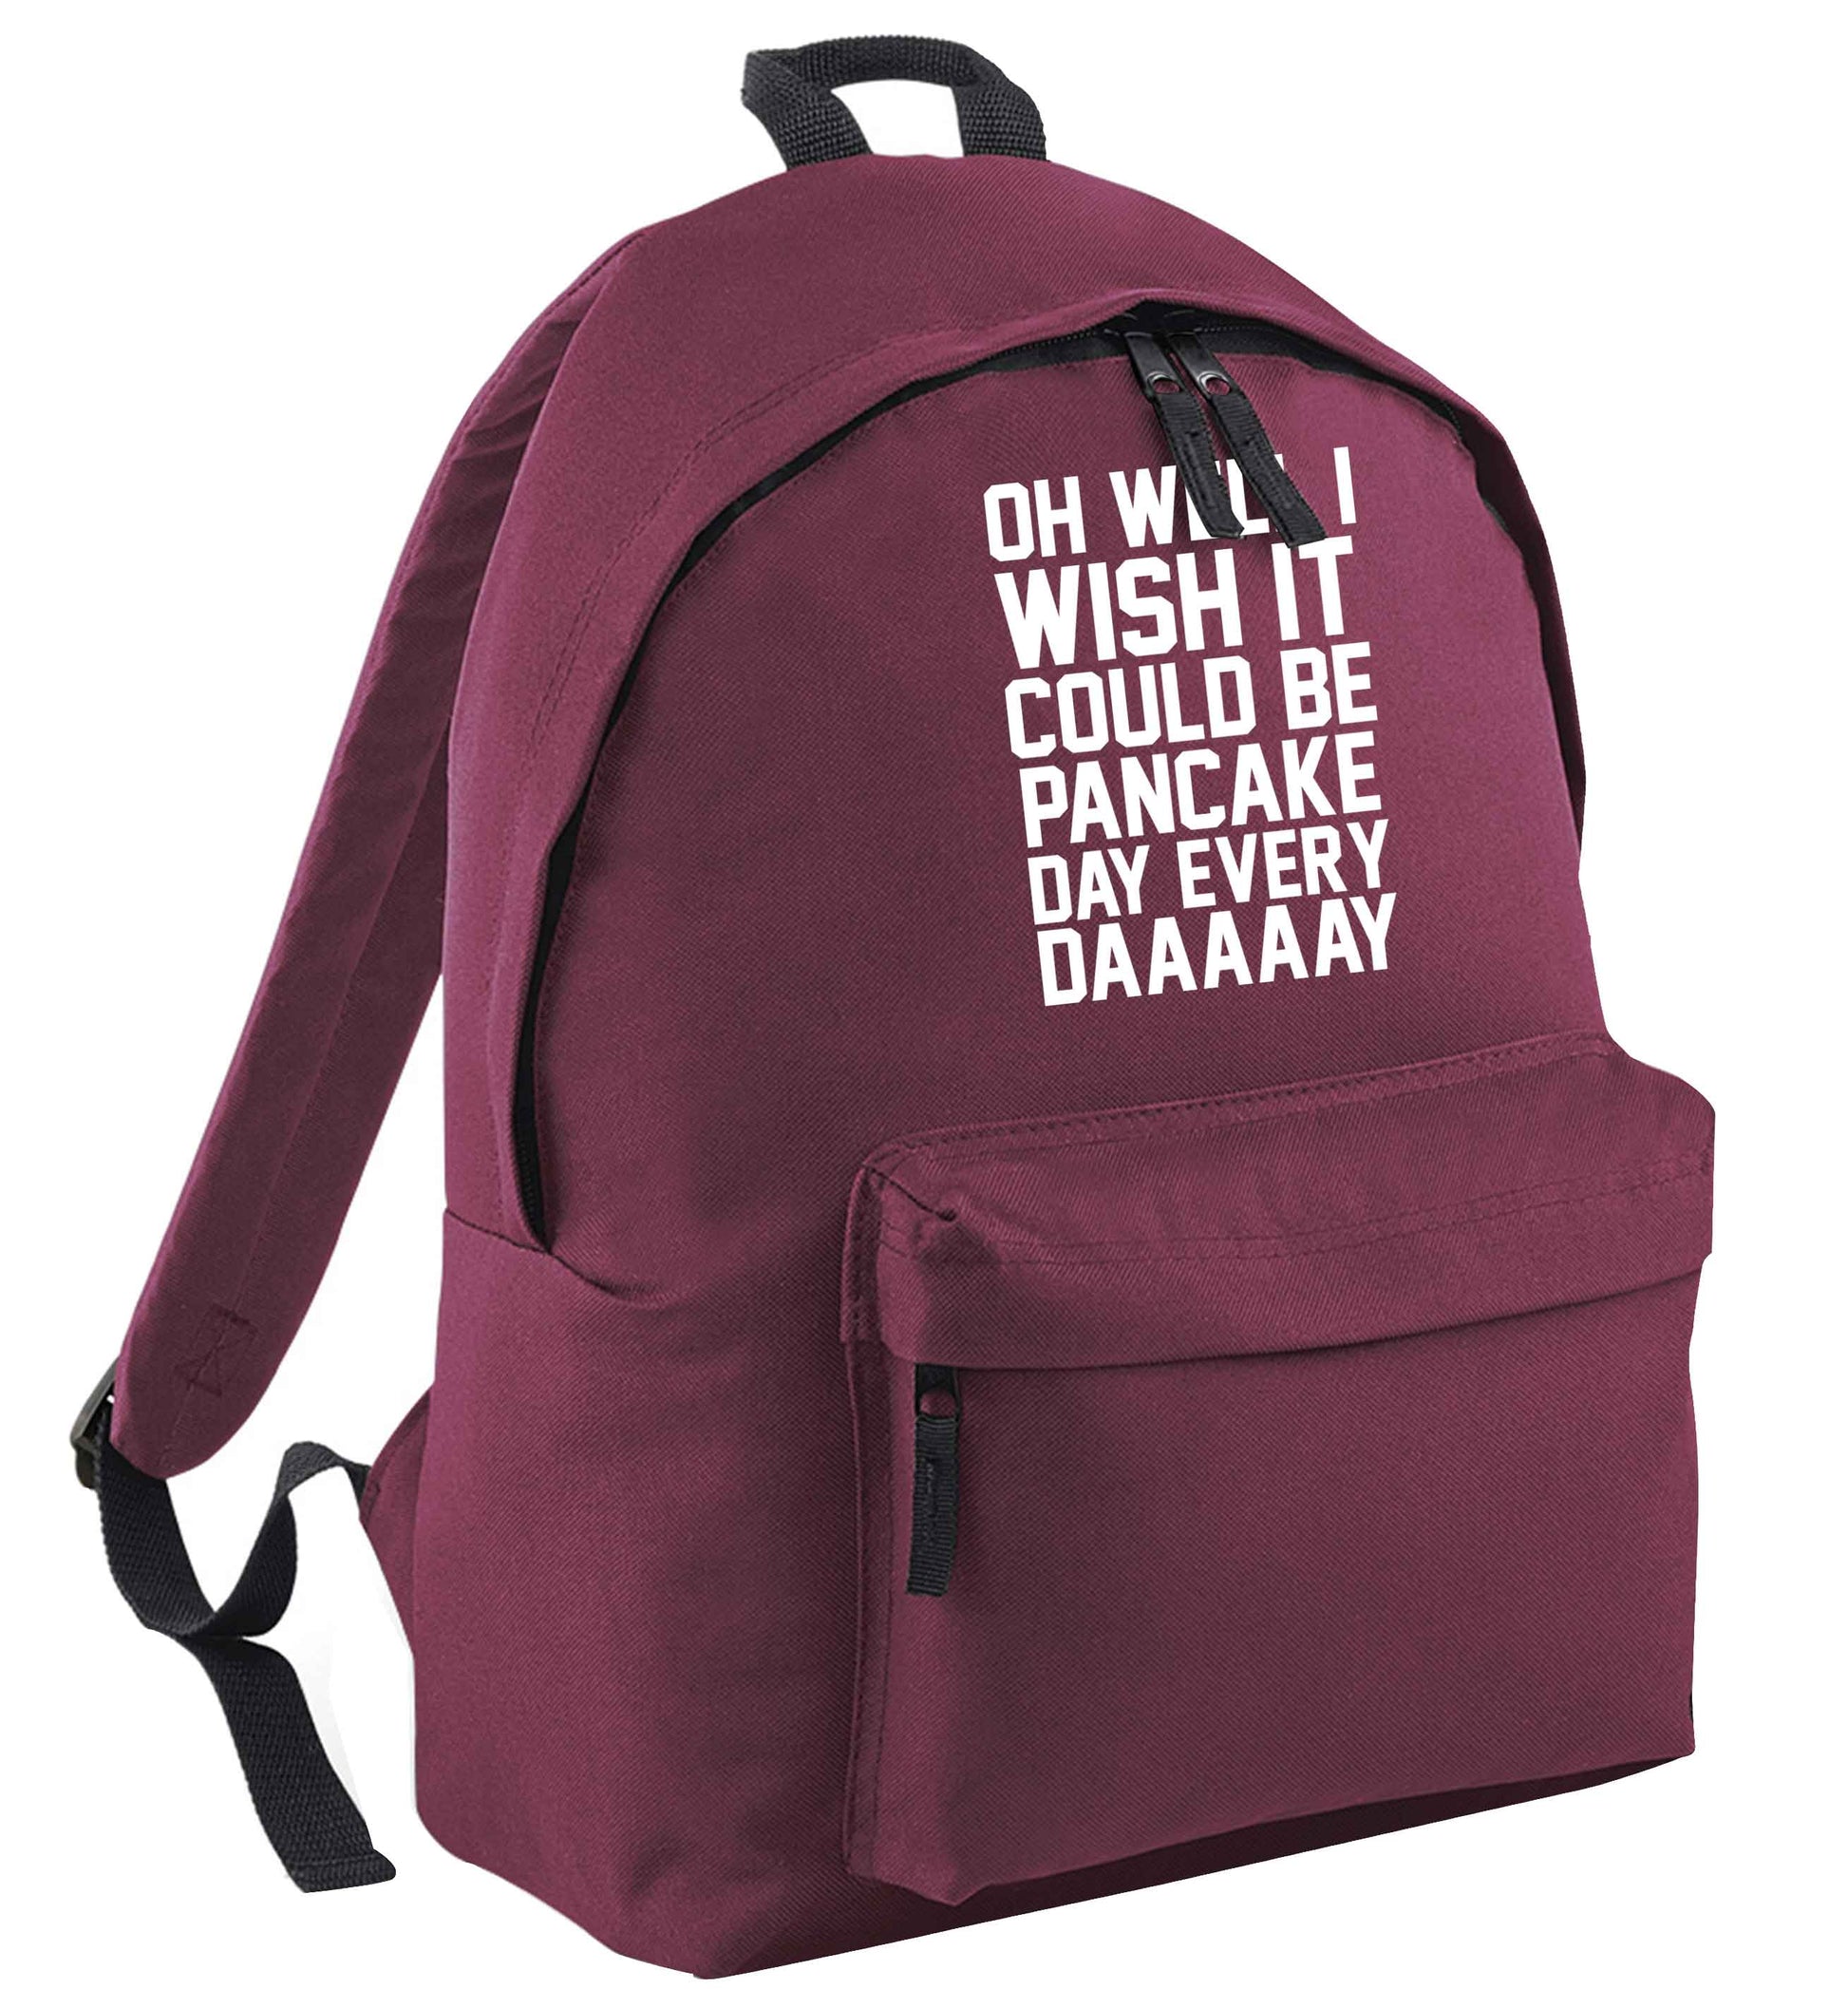 Oh well I wish it could be pancake day every day black childrens backpack